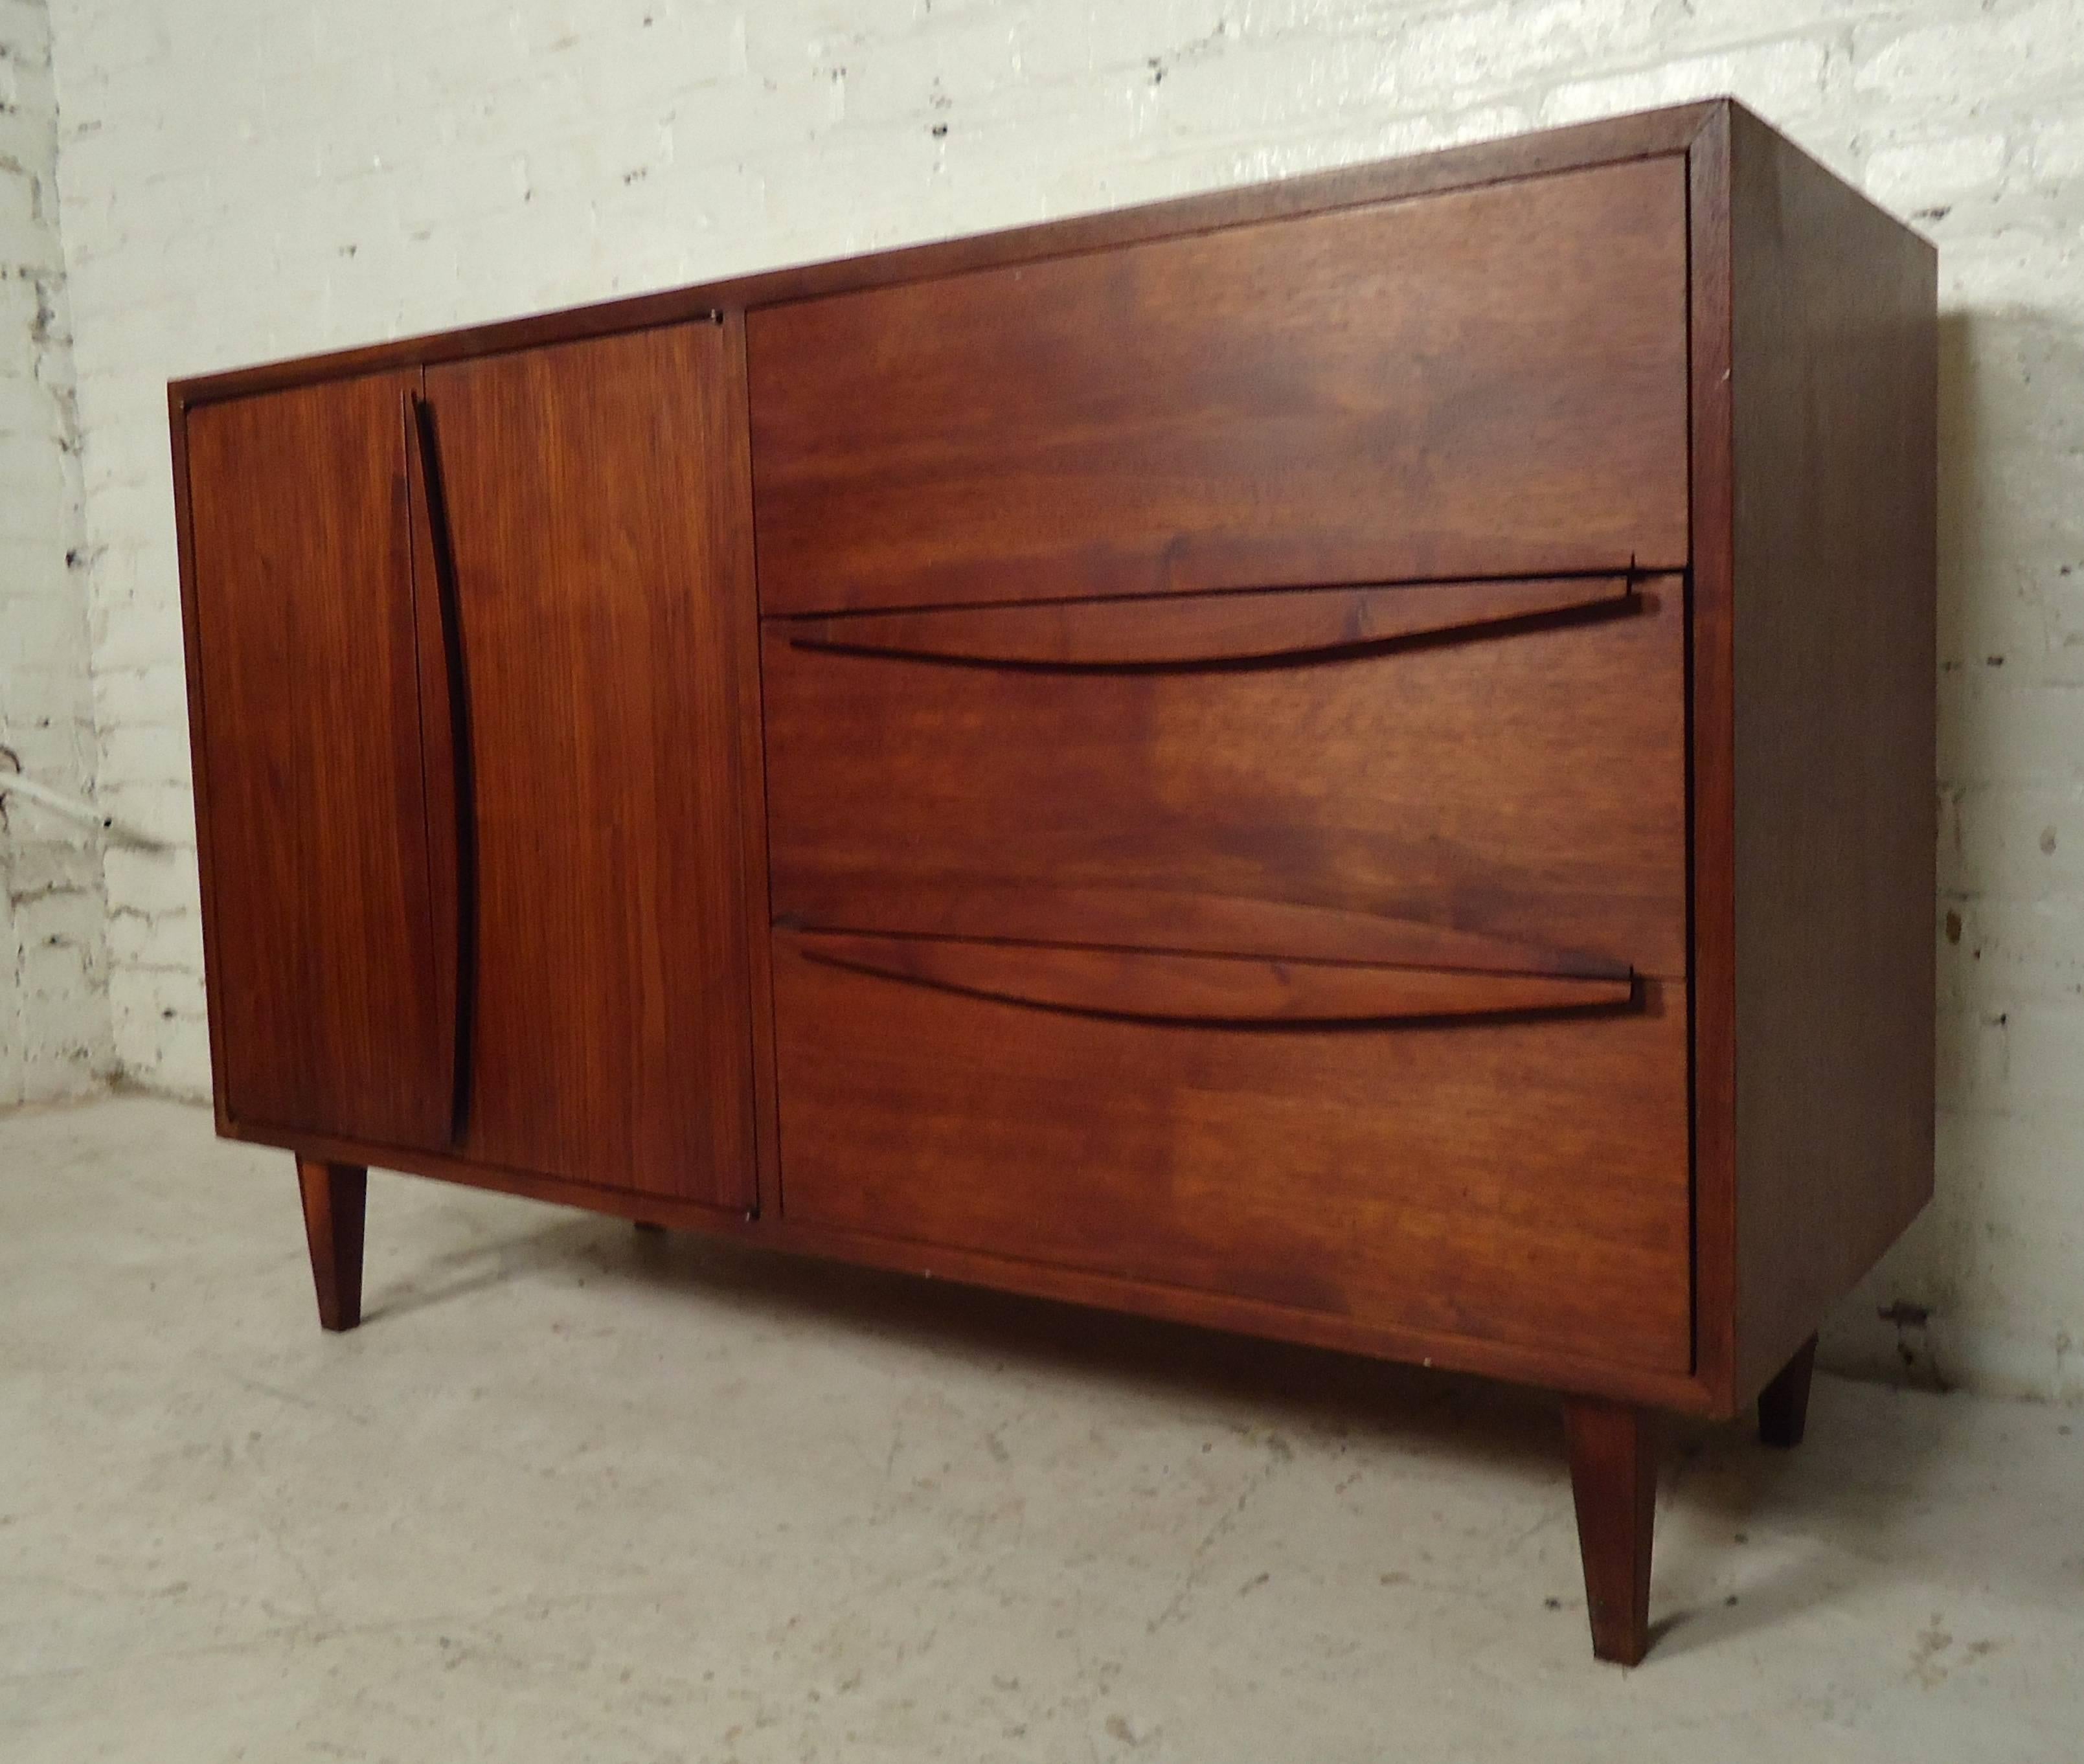 Stunning vintage-modern cabinet with rich teakwood grain, dual door cabinet storage, and three pull drawers with uniquely sculpted handles.

Please confirm item location NY or NJ with dealer.